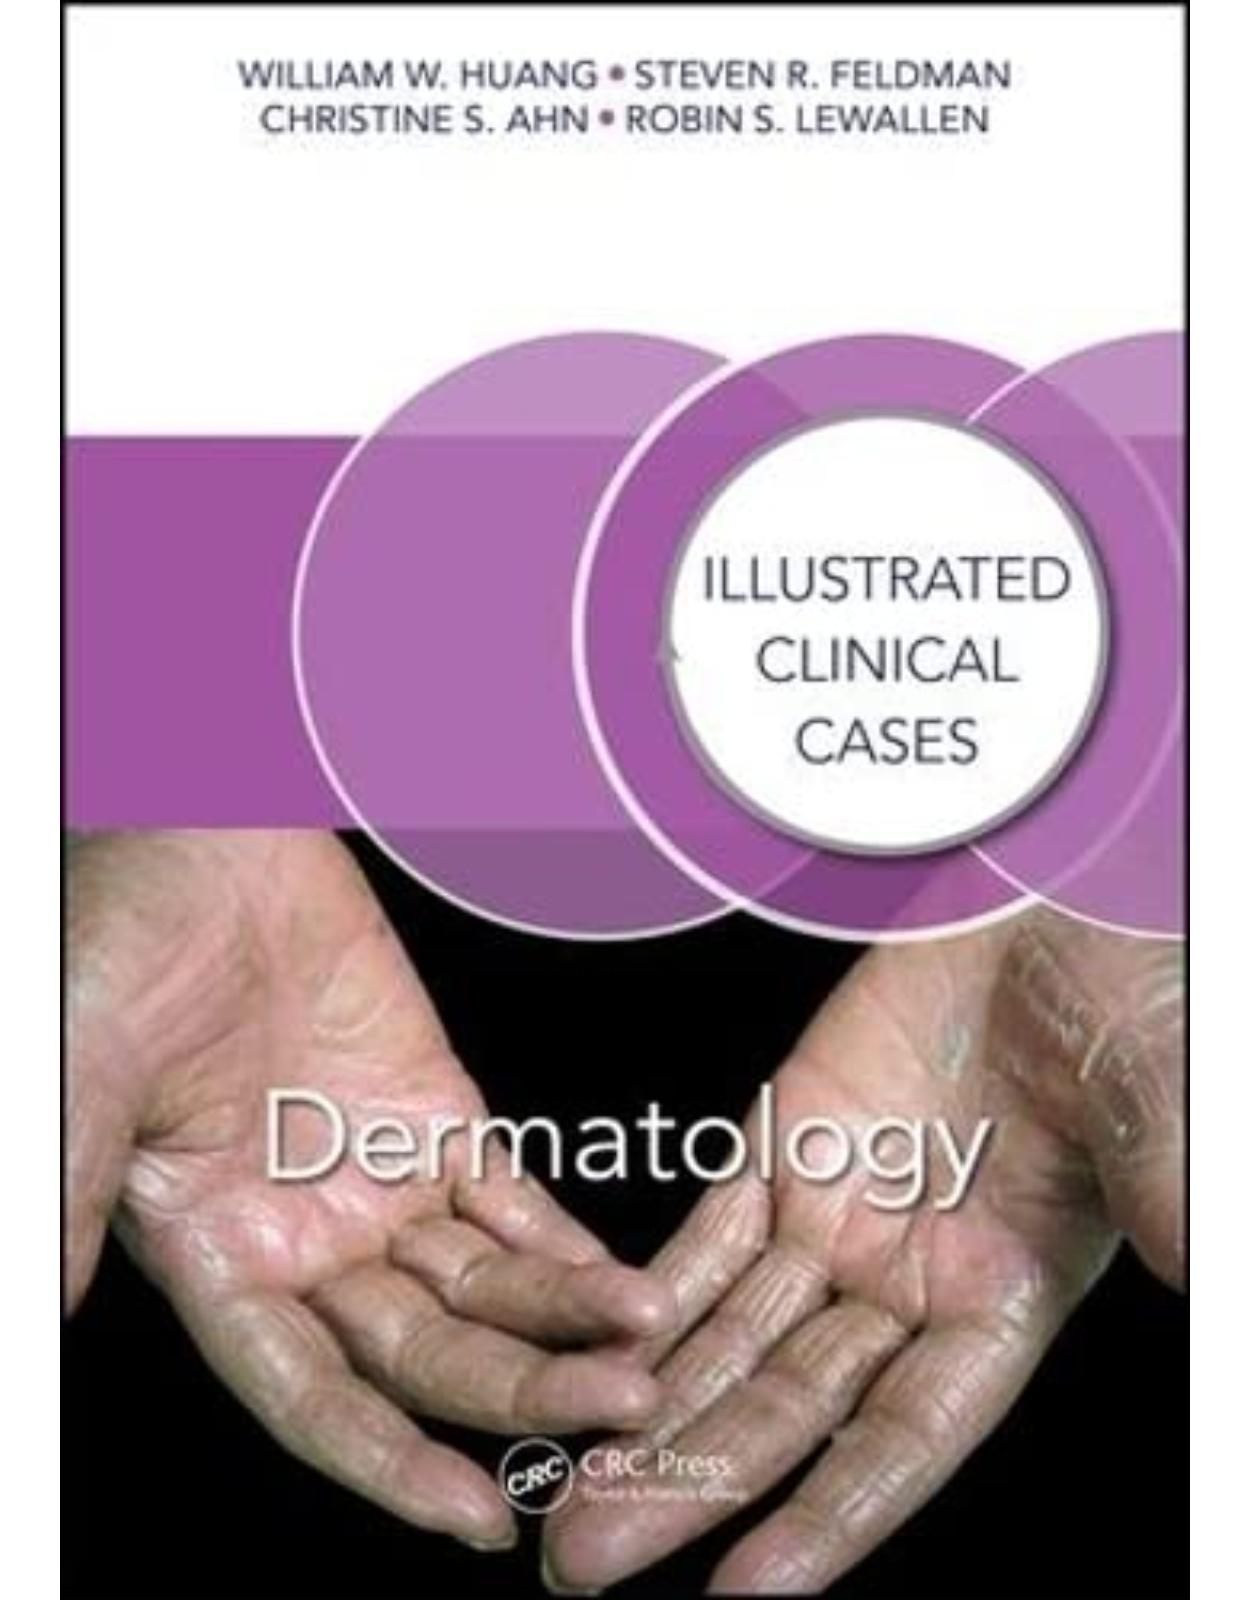 Dermatology: Illustrated Clinical Cases 